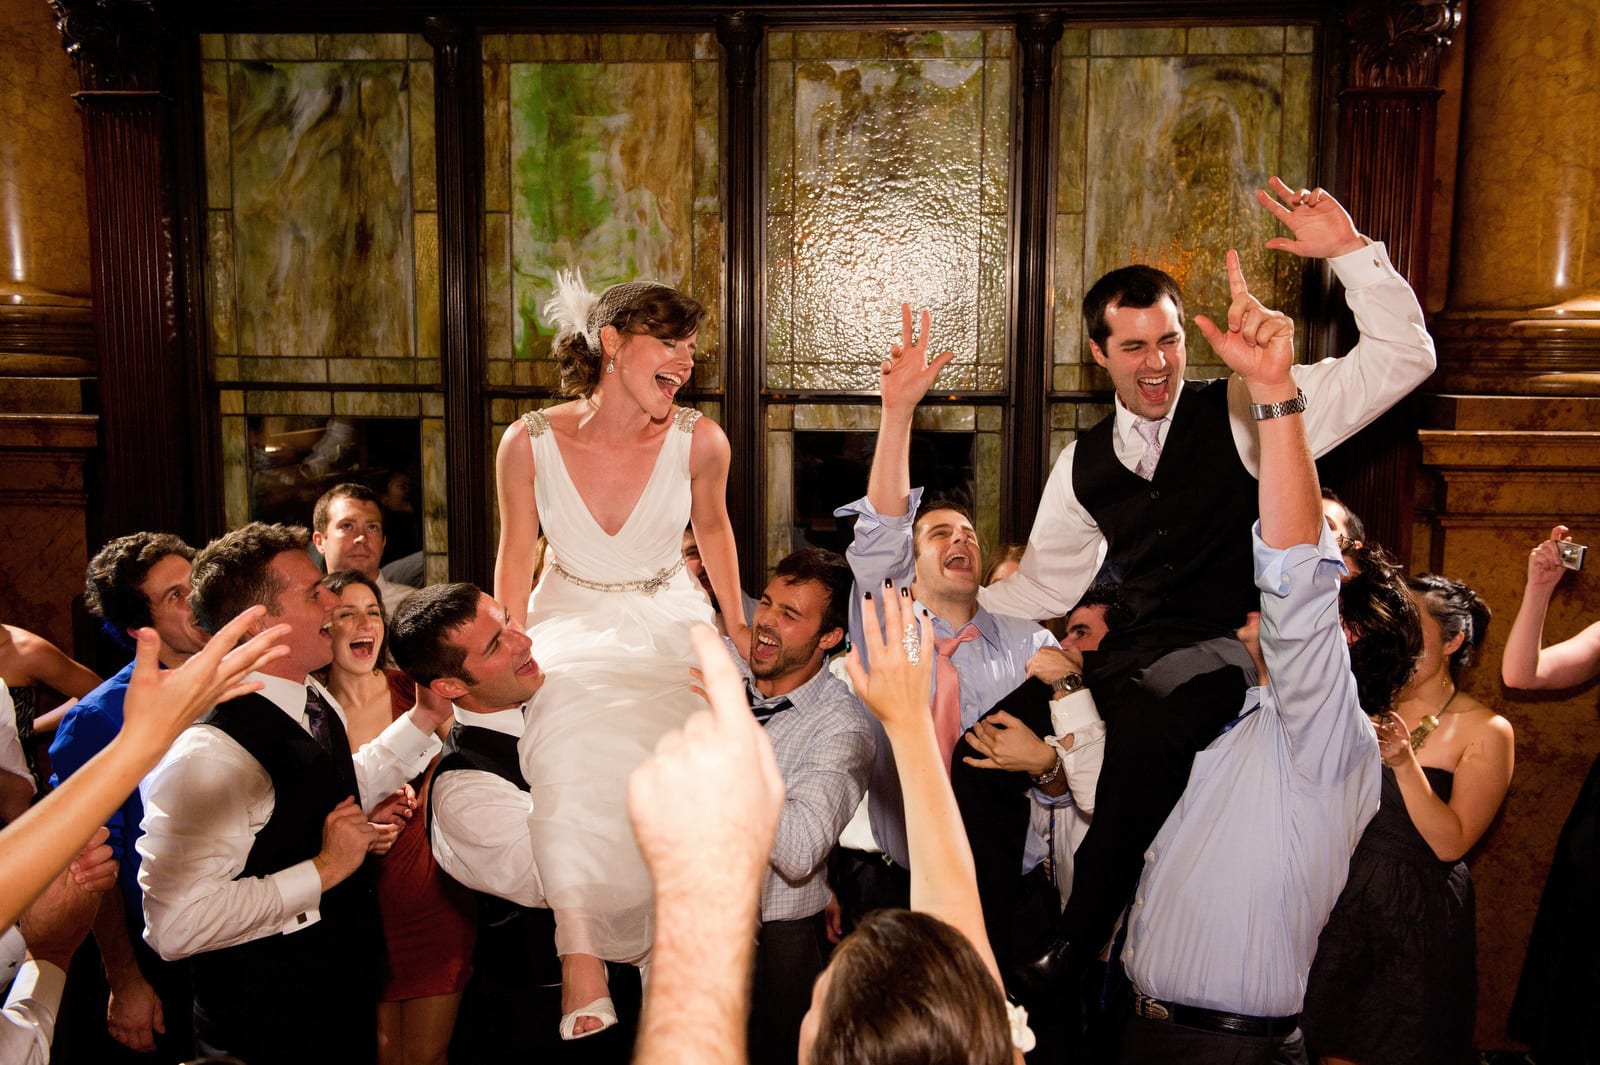 A bride and groom laugh as they are held aloft by their wedding guests at The Grand Concourse.